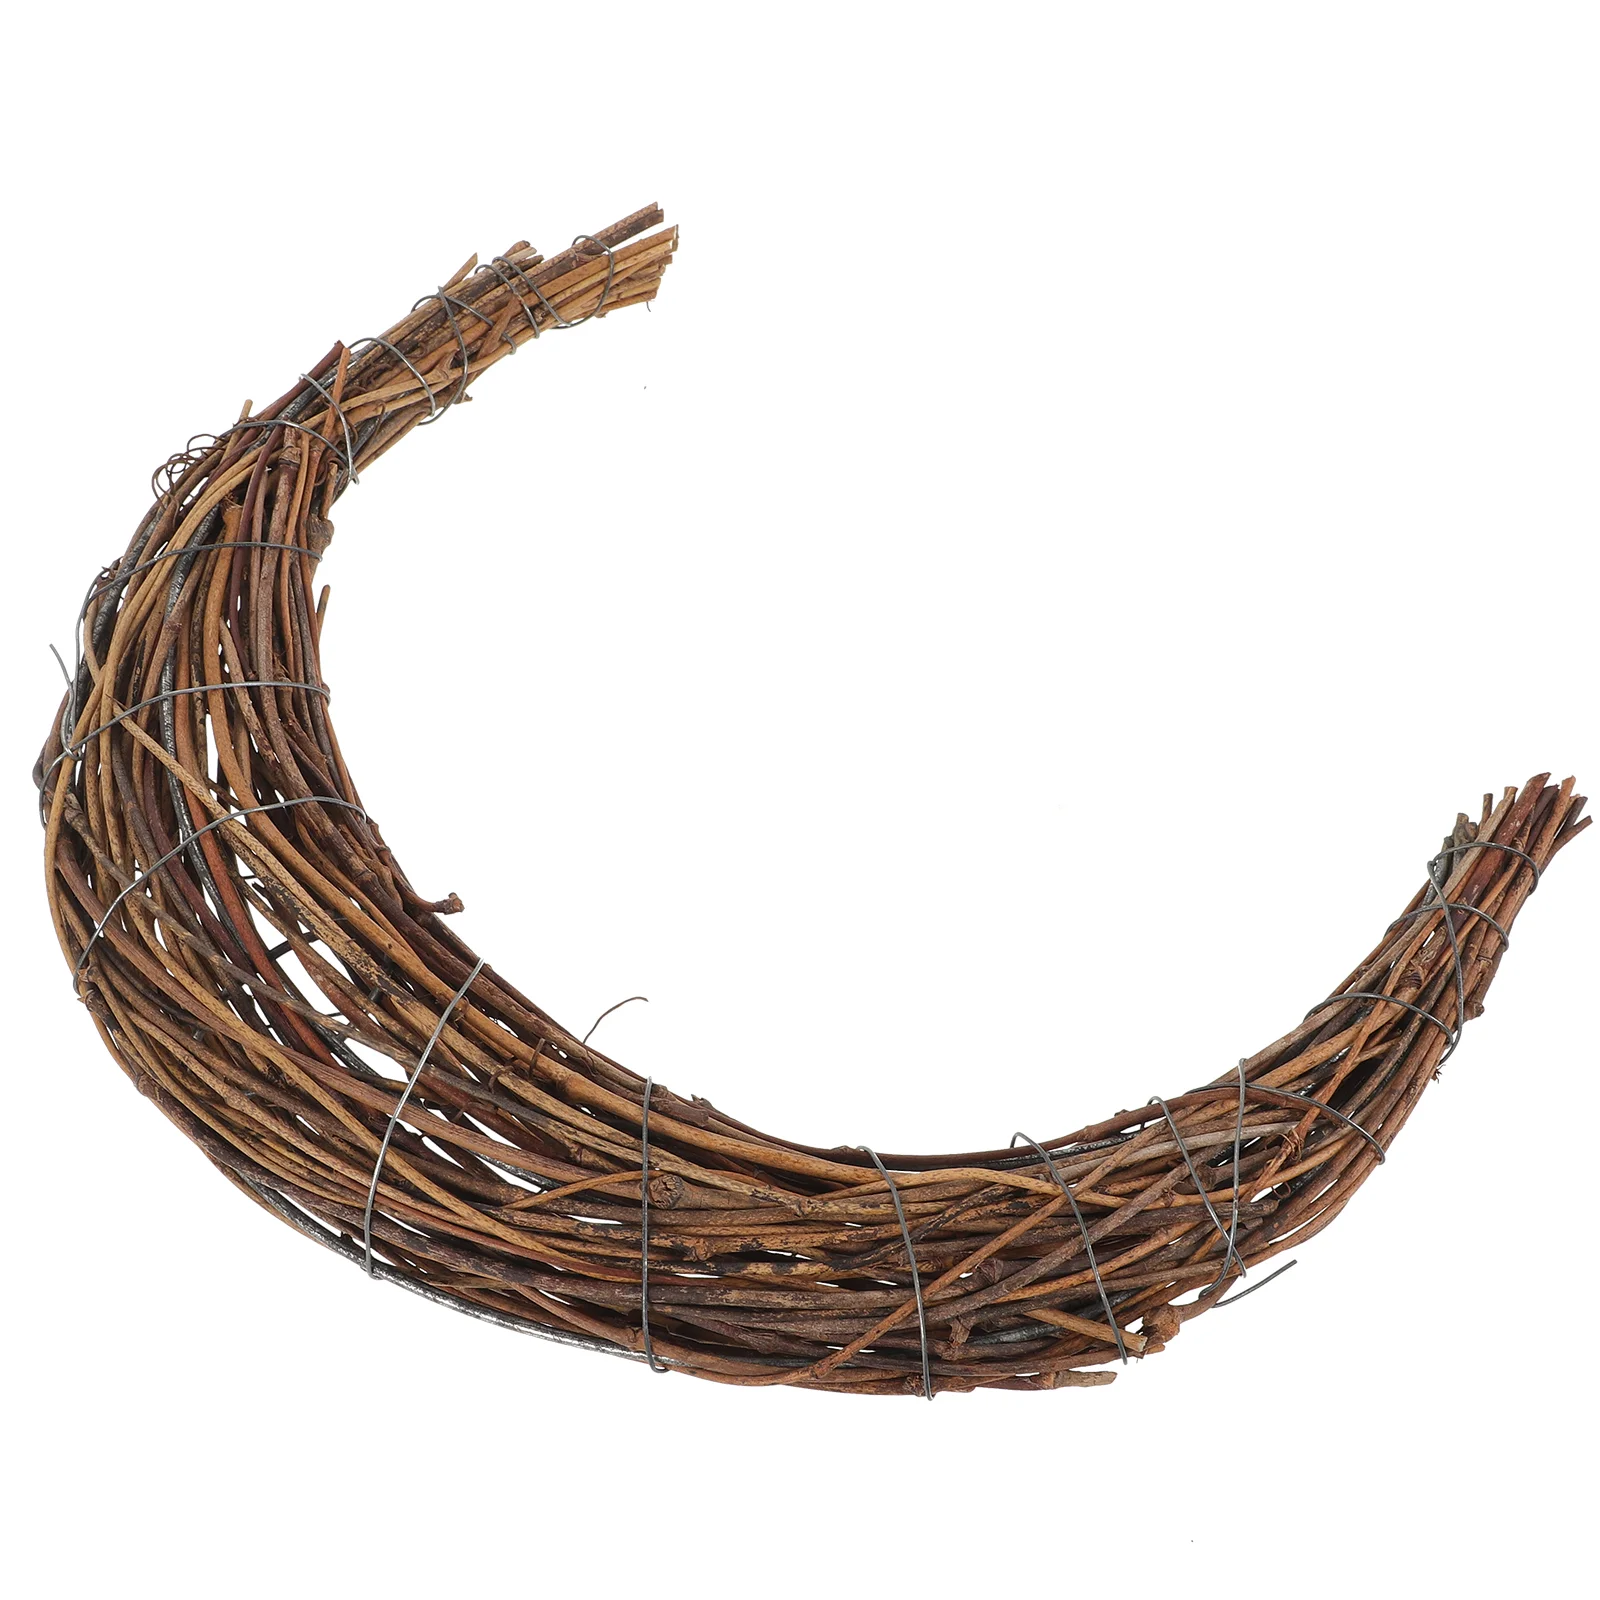 

Wedding Accessories Smilax Rattan Moon-shaped Wreath Frame Pergola Natural Hand Woven Rings Wire